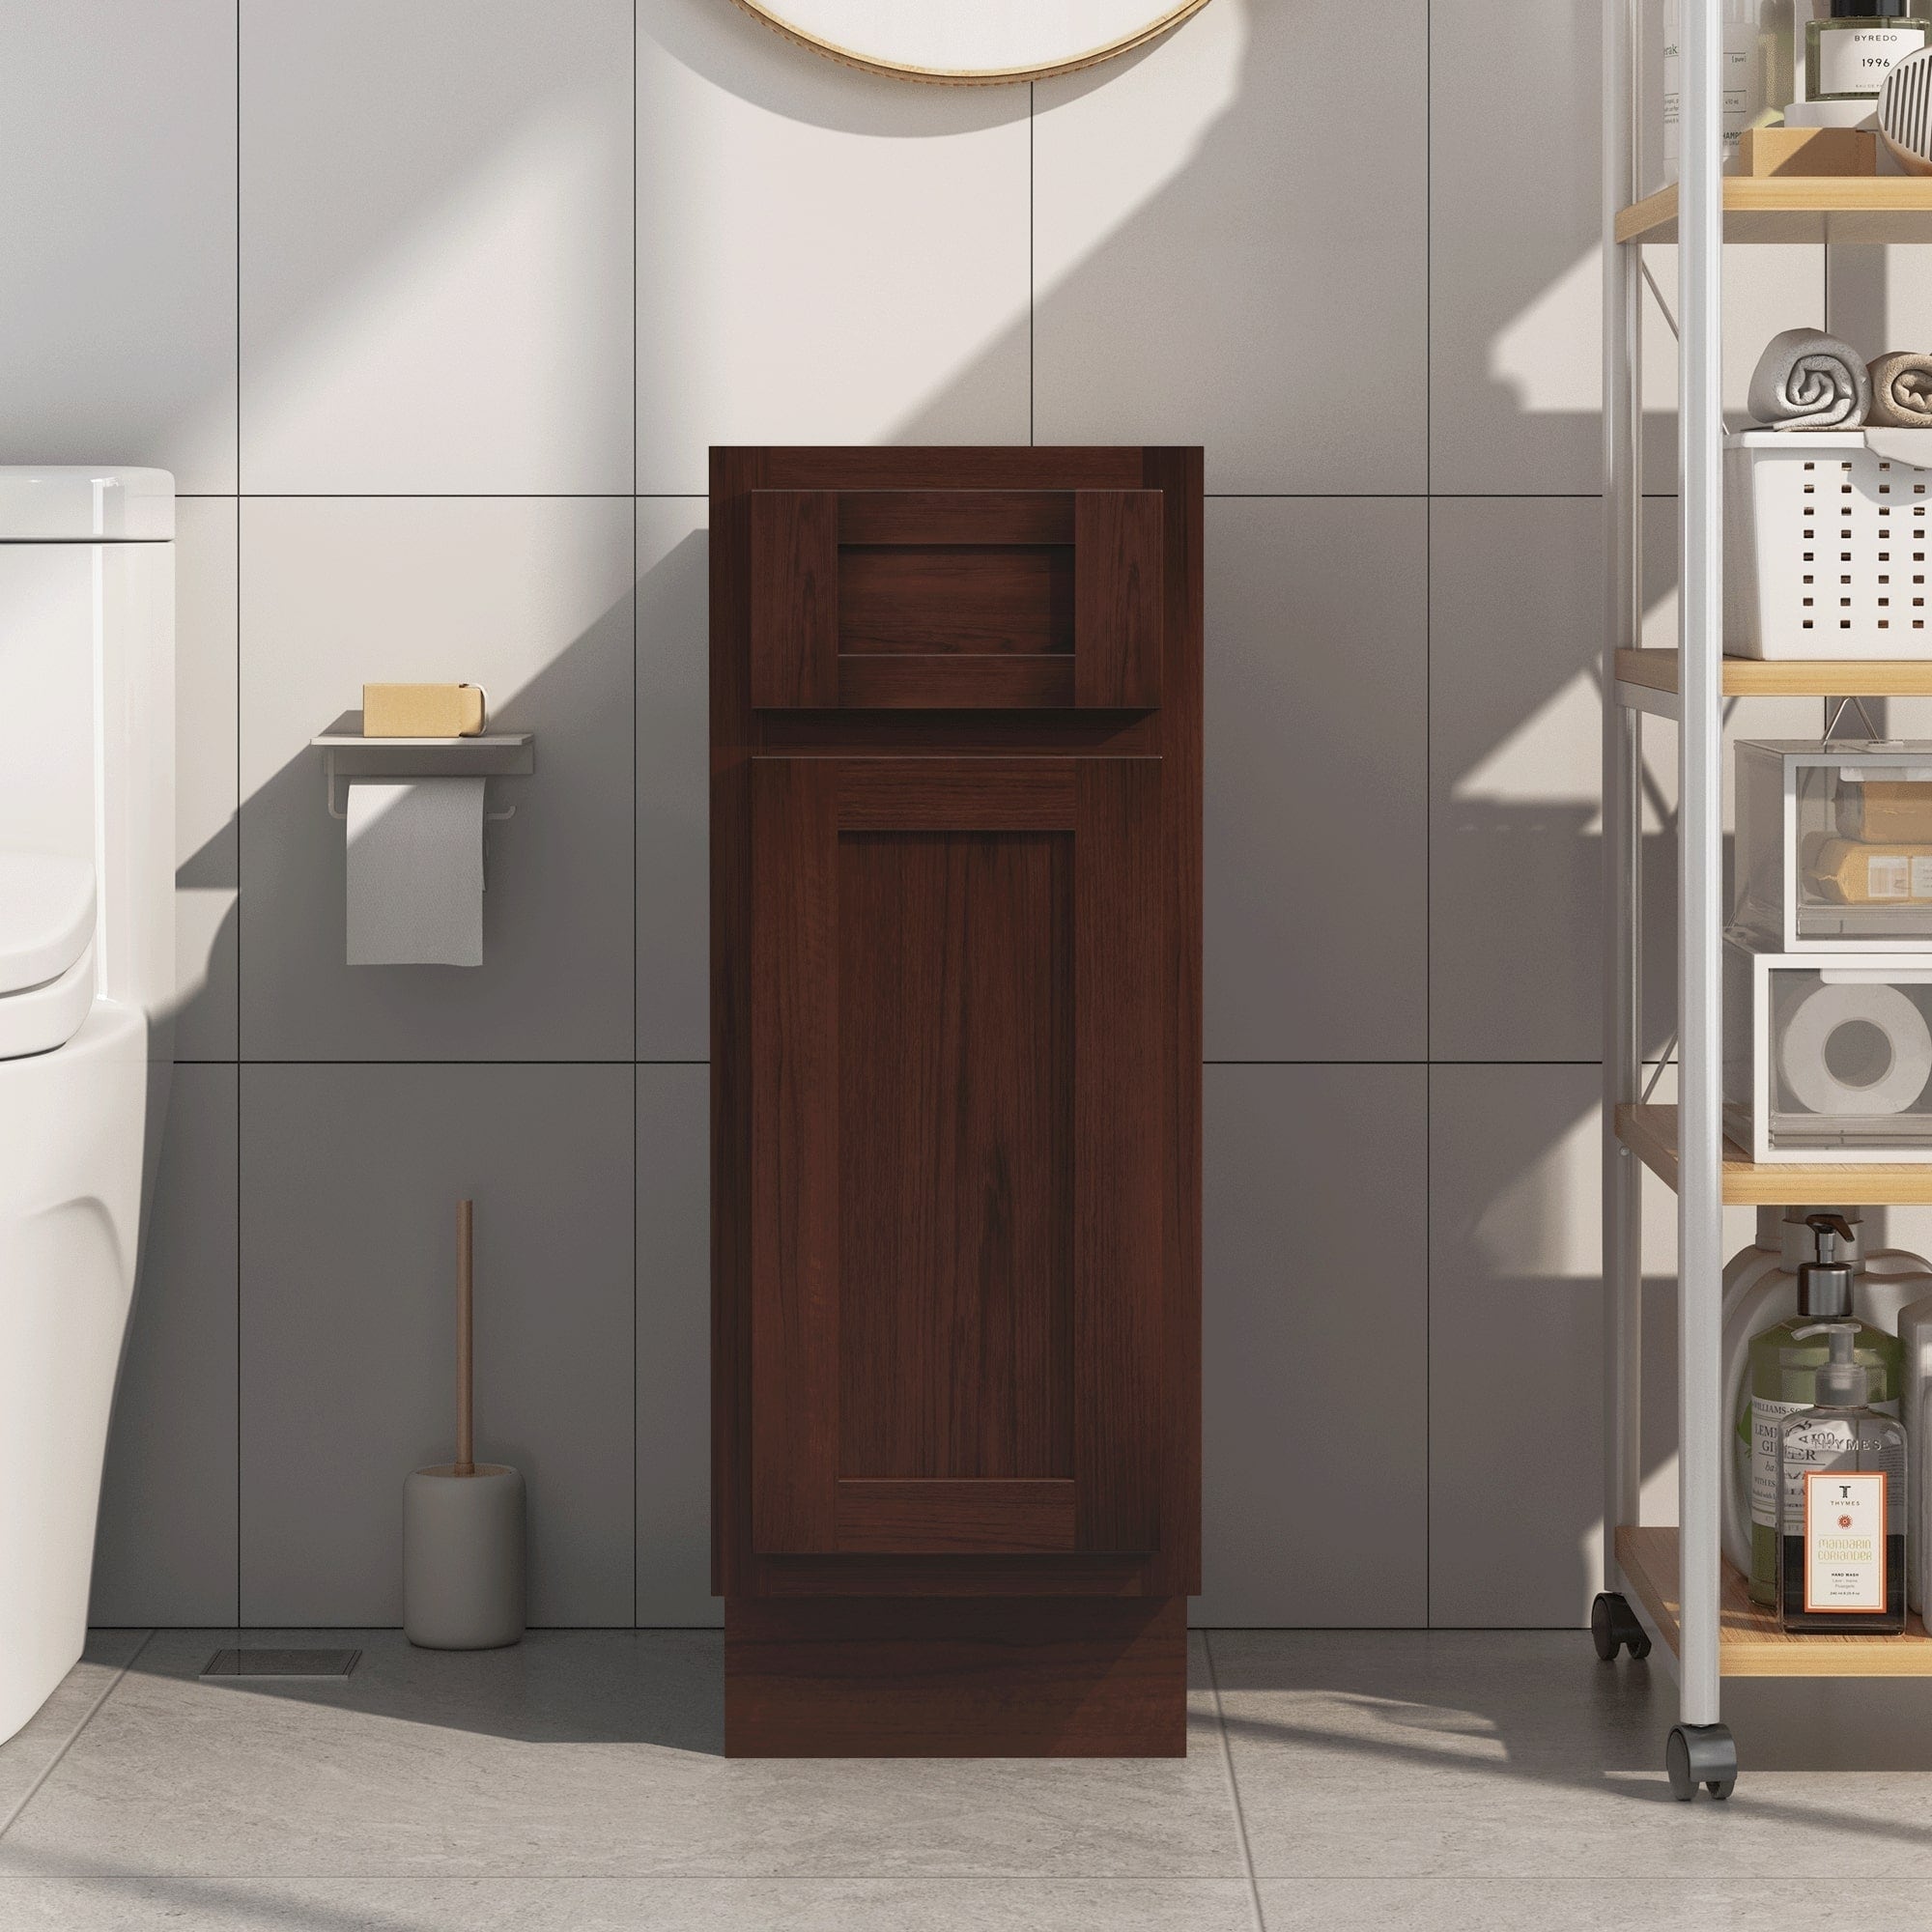 https://ak1.ostkcdn.com/images/products/is/images/direct/d4c5b5aed2848fd8c5e4fe18e67b62db87e10aa9/Vanity-Art-12-Inch-Bathroom-Vanity-Base-Cabinet-Single-Right-Offset-Solid-Wood-Small-Bathroom-Storage-Floor-Cabinet.jpg